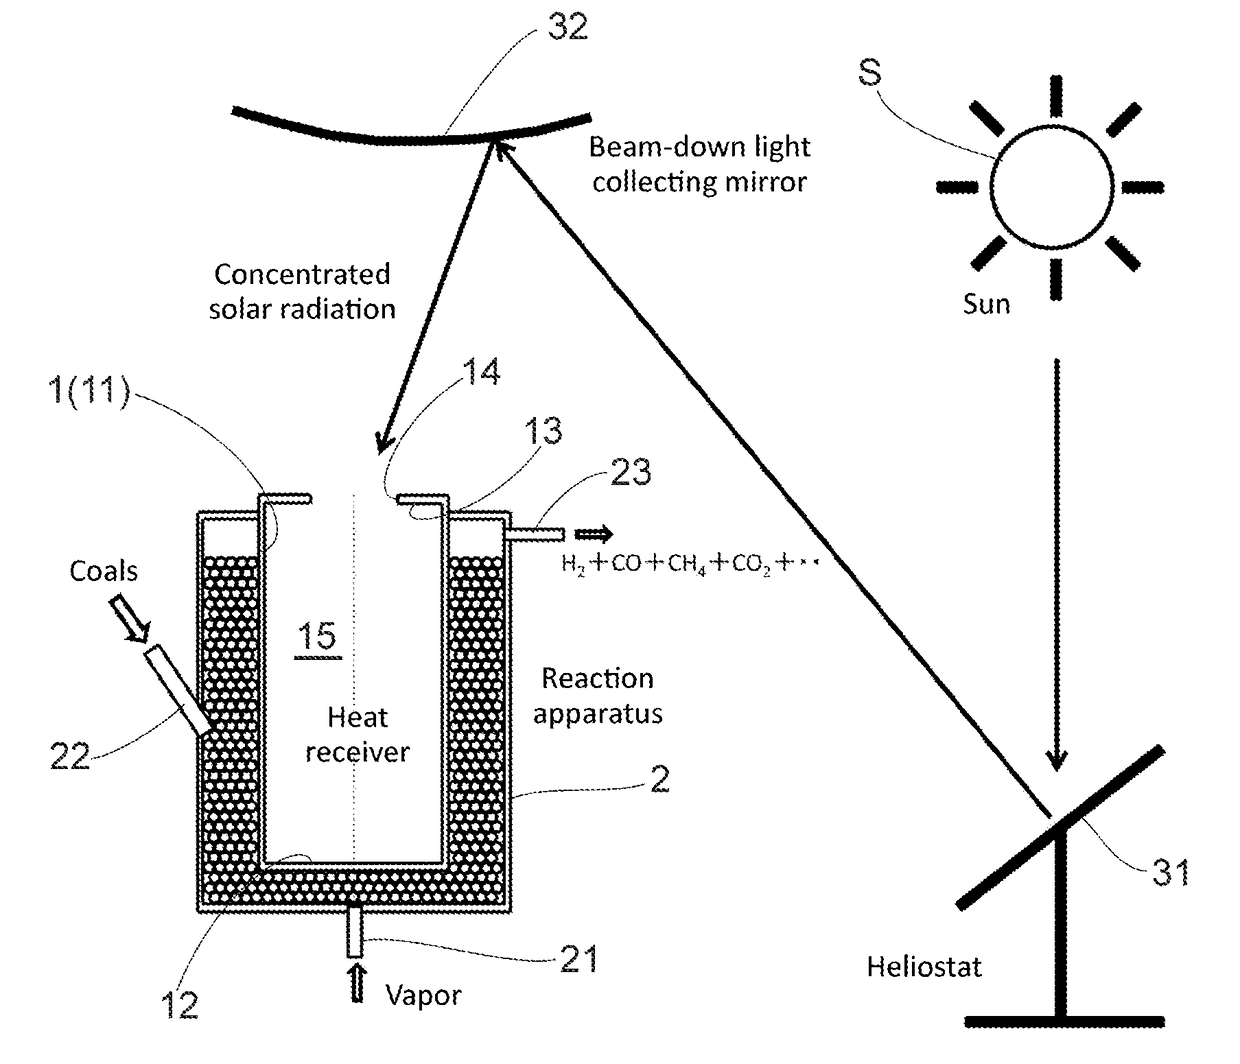 Concentrated solar heat receiver, reactor, and heater